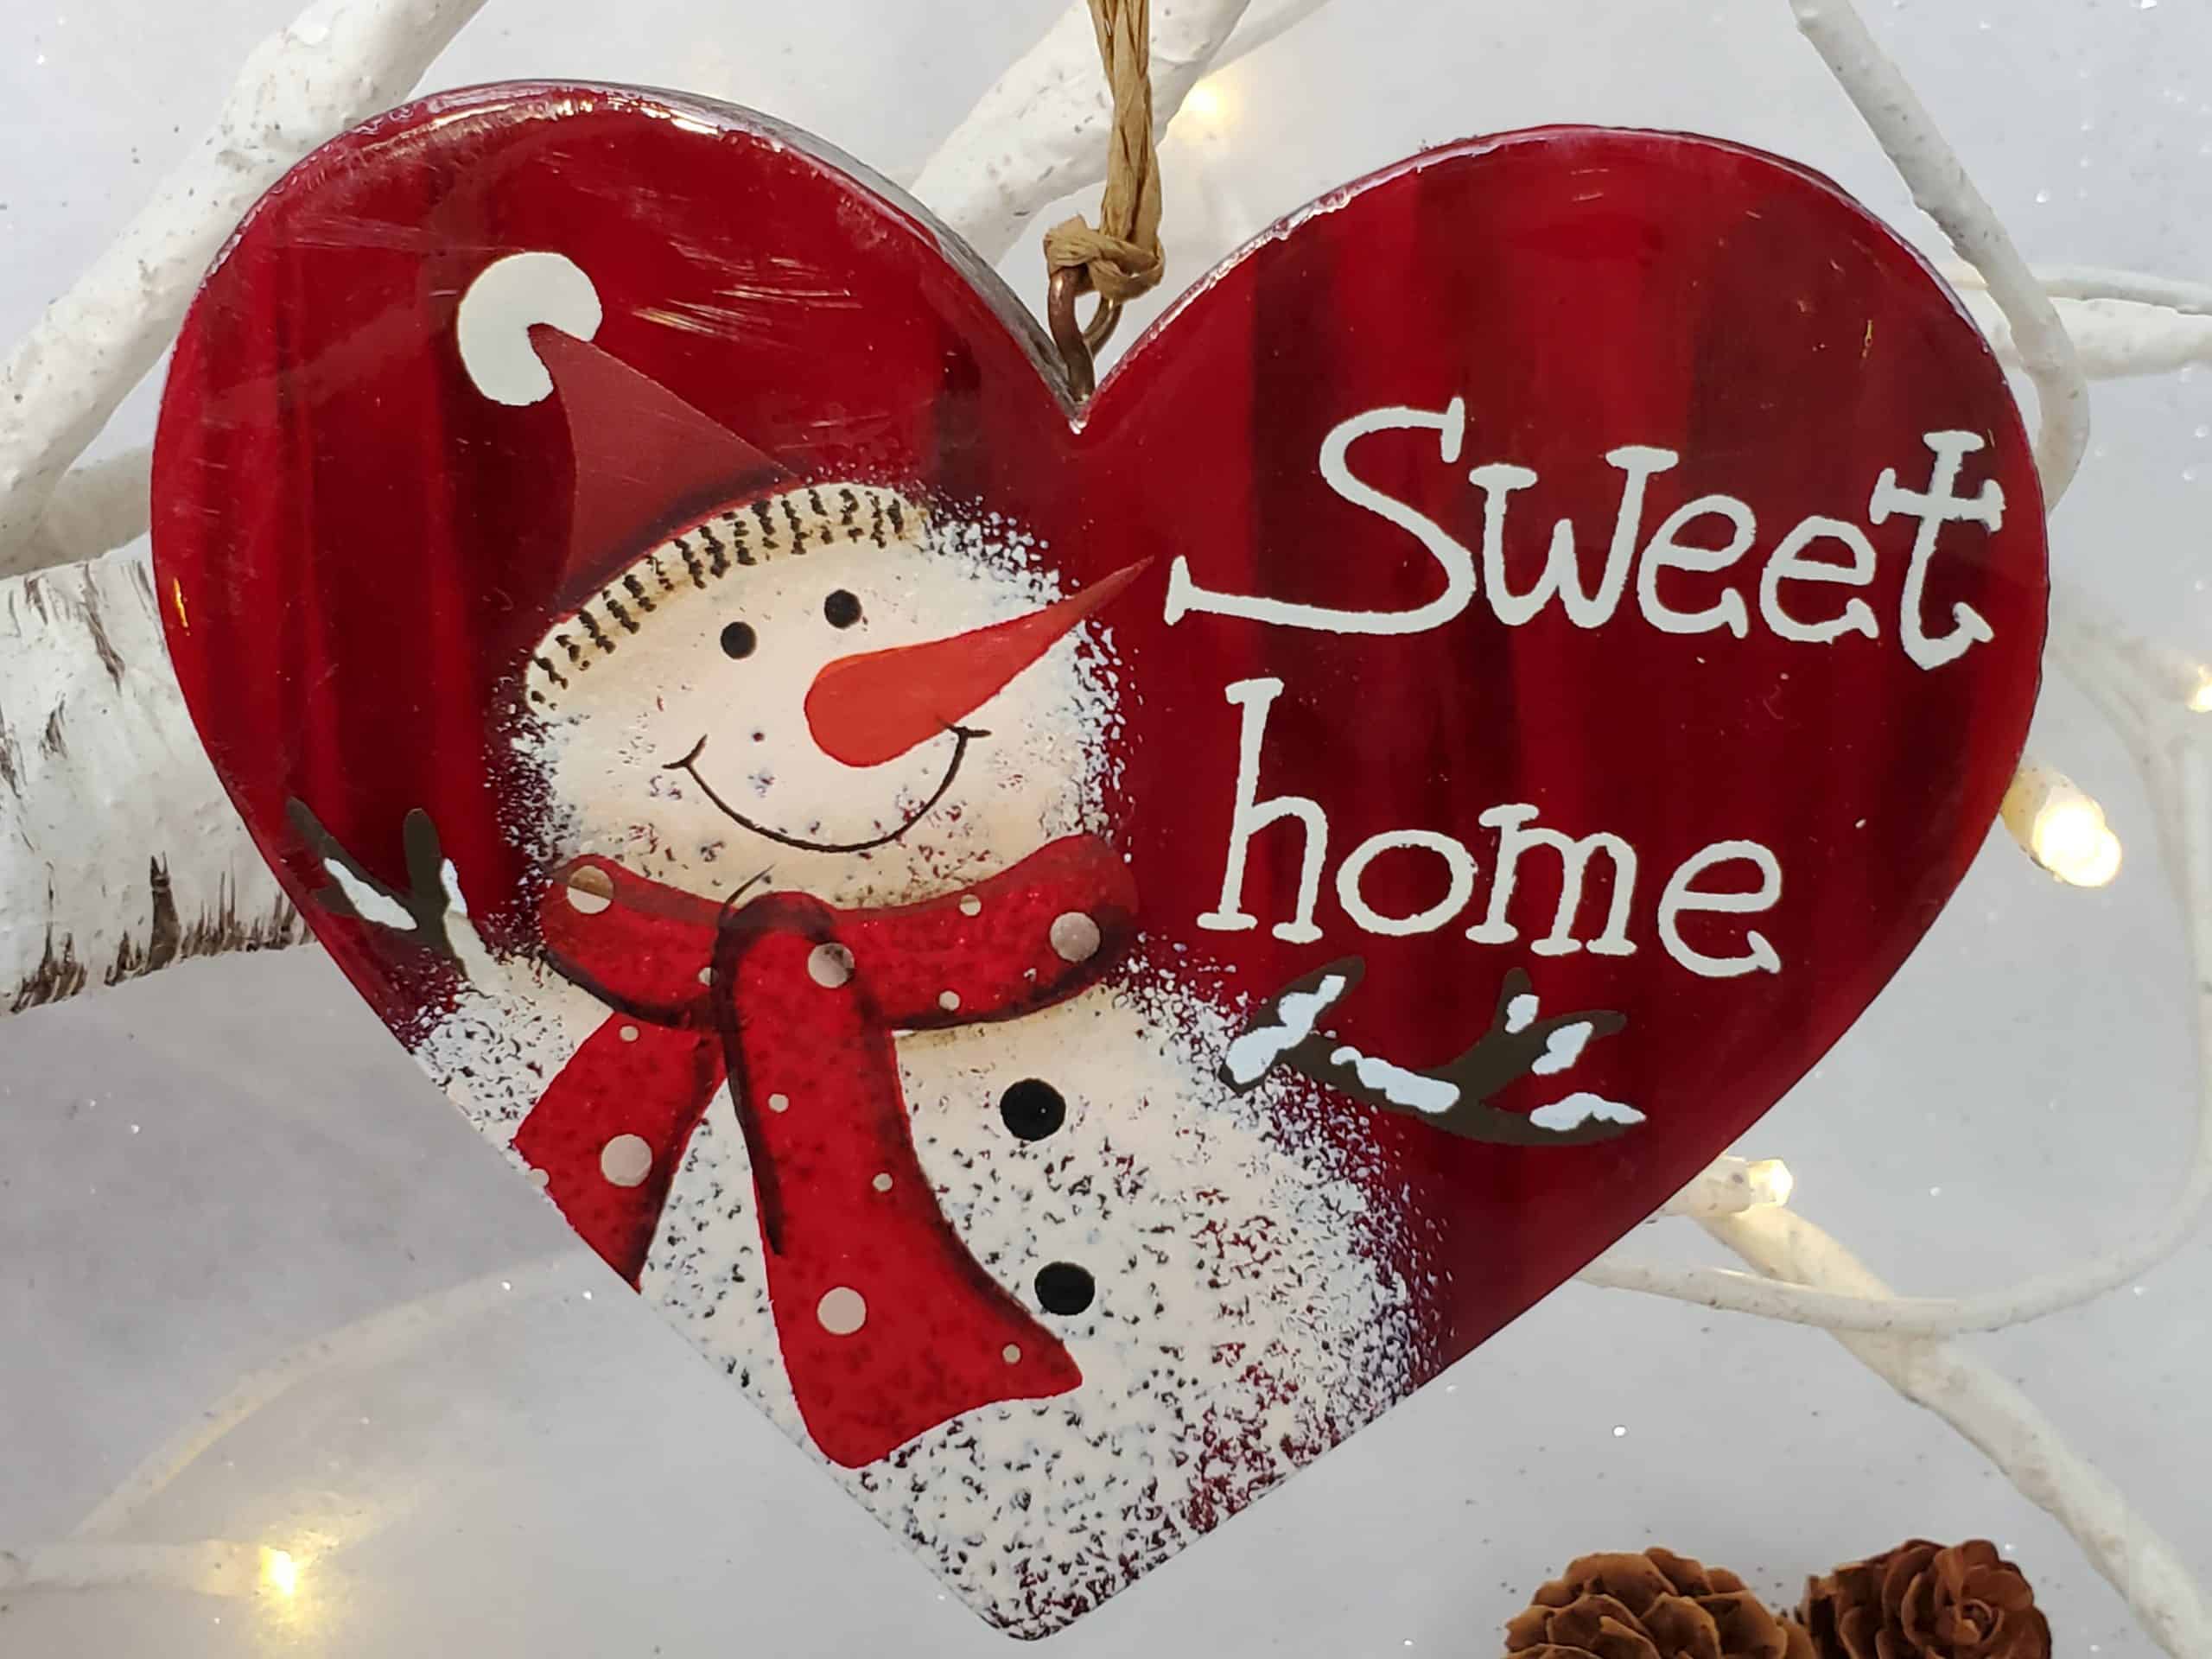 Heart shaped tree decorations with Snowman